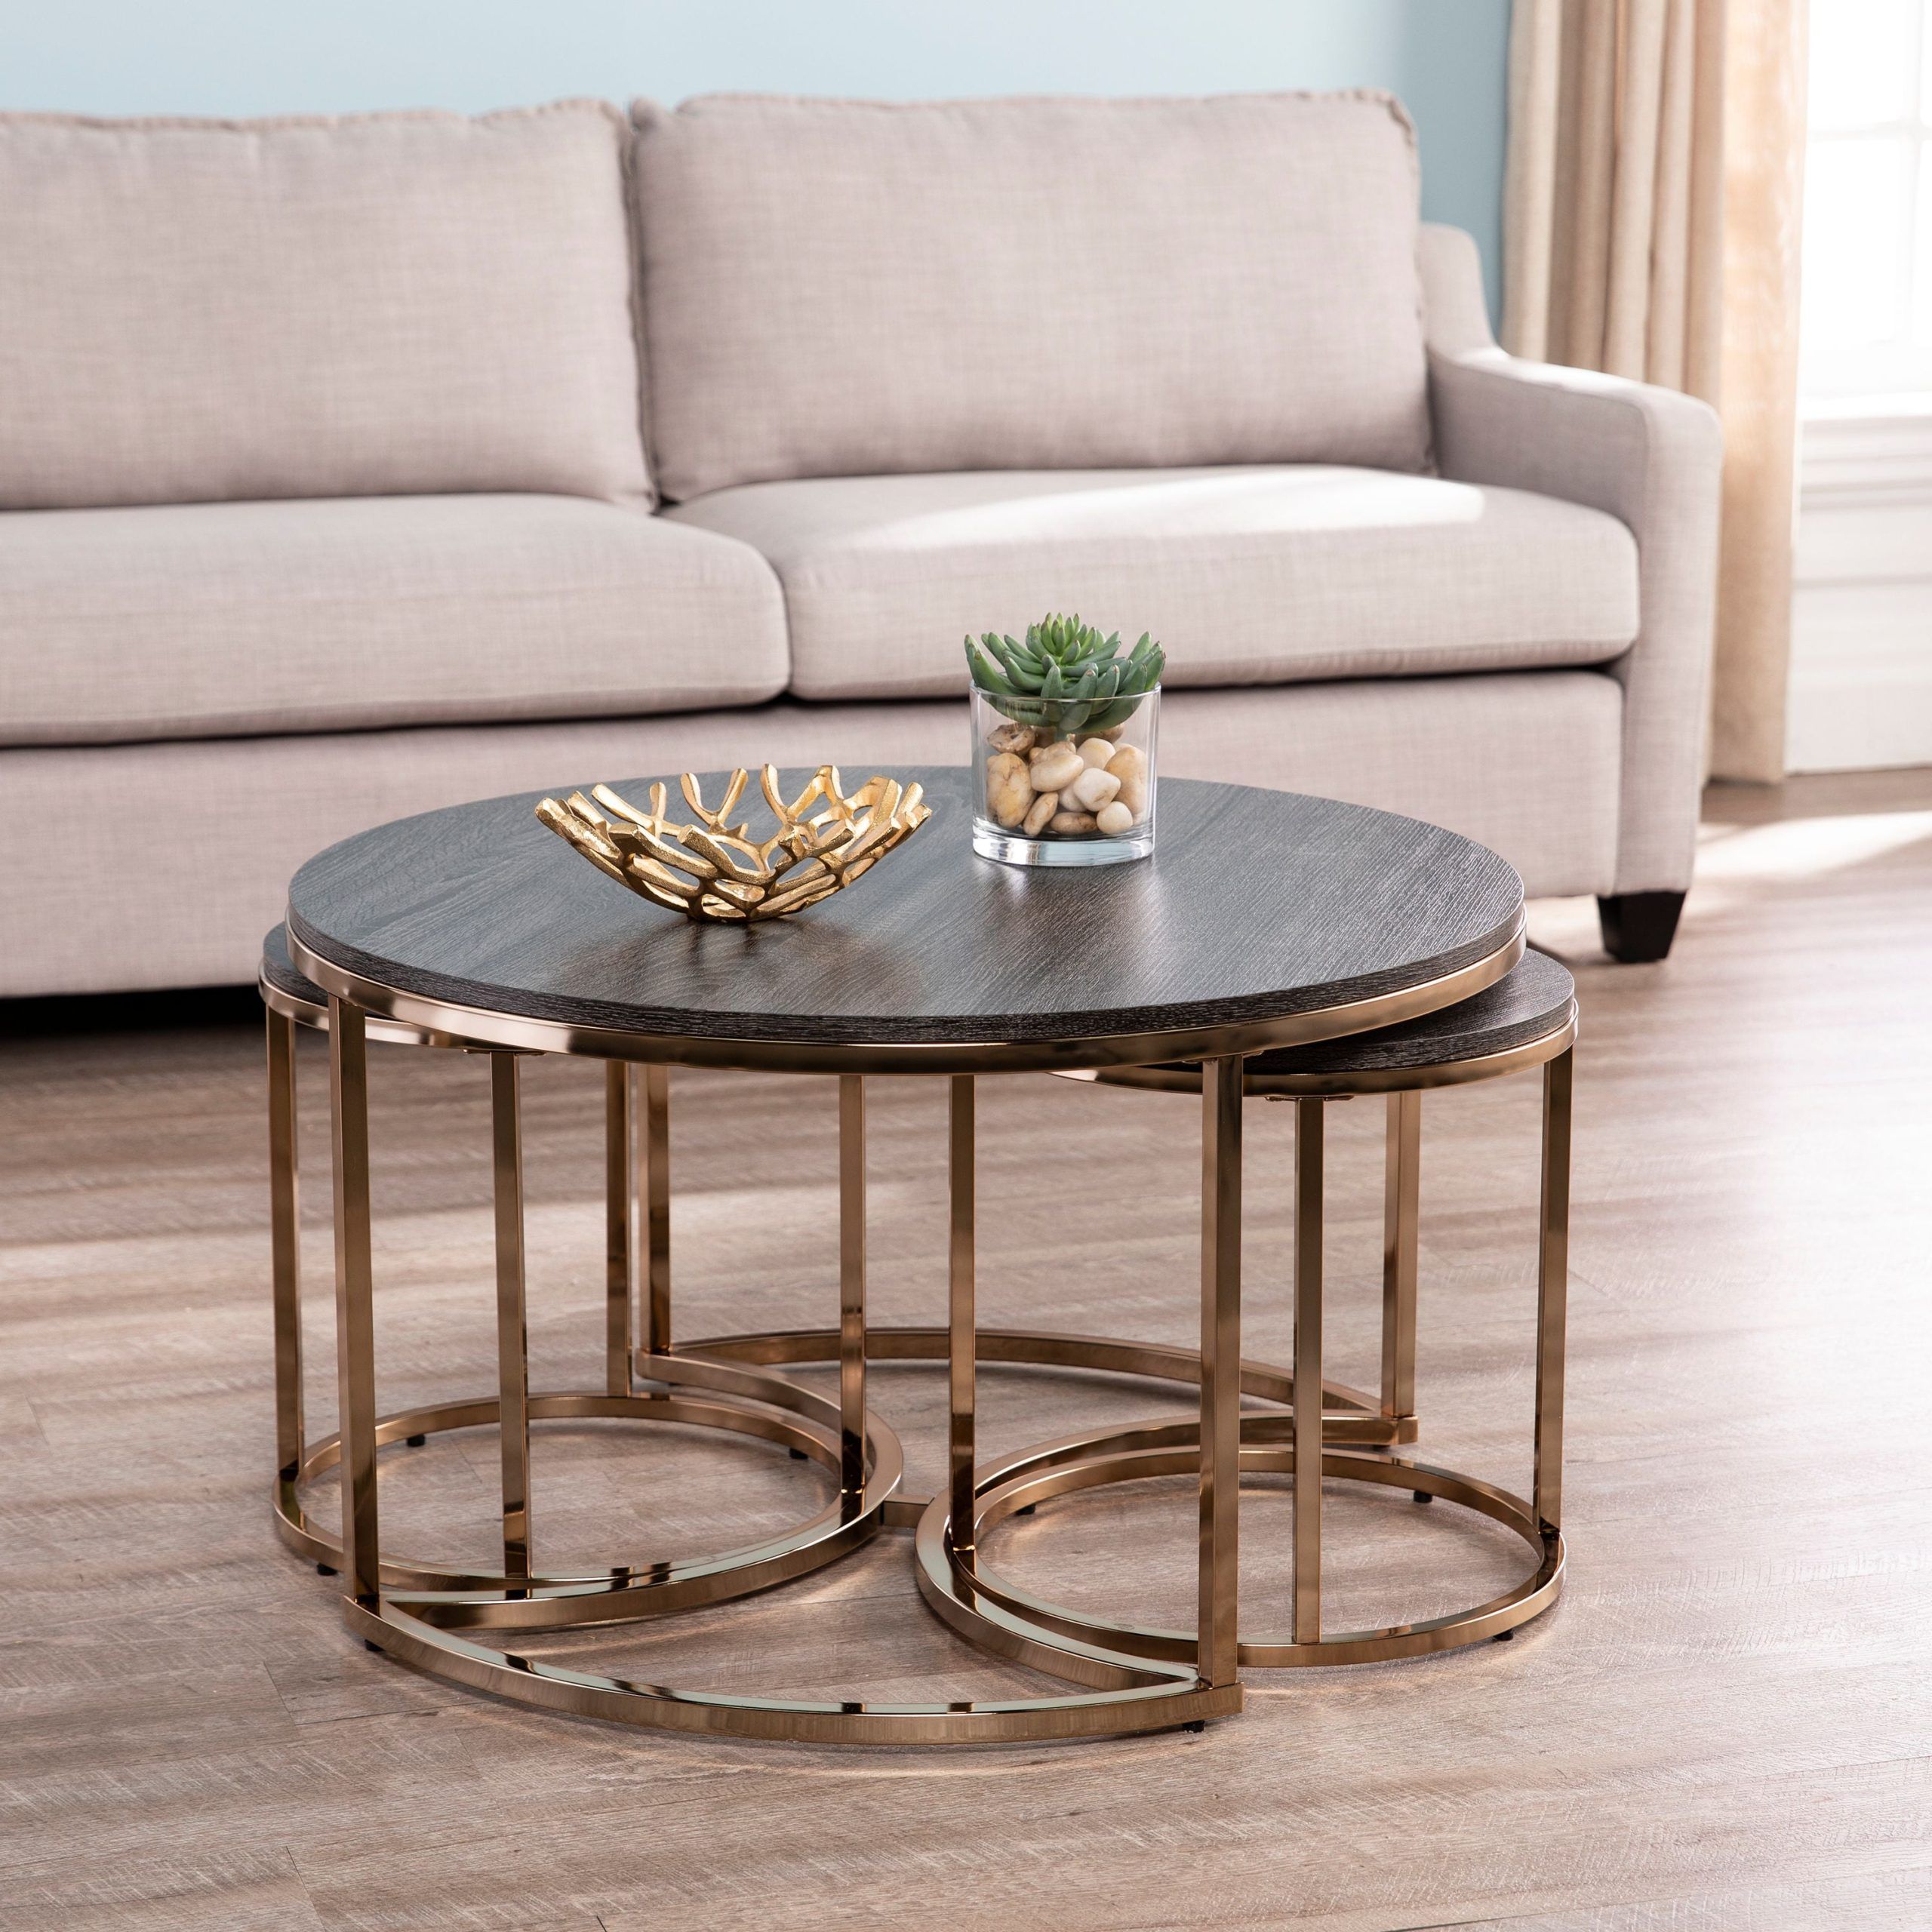 Ember Interiors Lokyle Metal And Wood Round Nesting Coffee Table, 3 Inside Most Recent Round Coffee Tables (View 3 of 15)